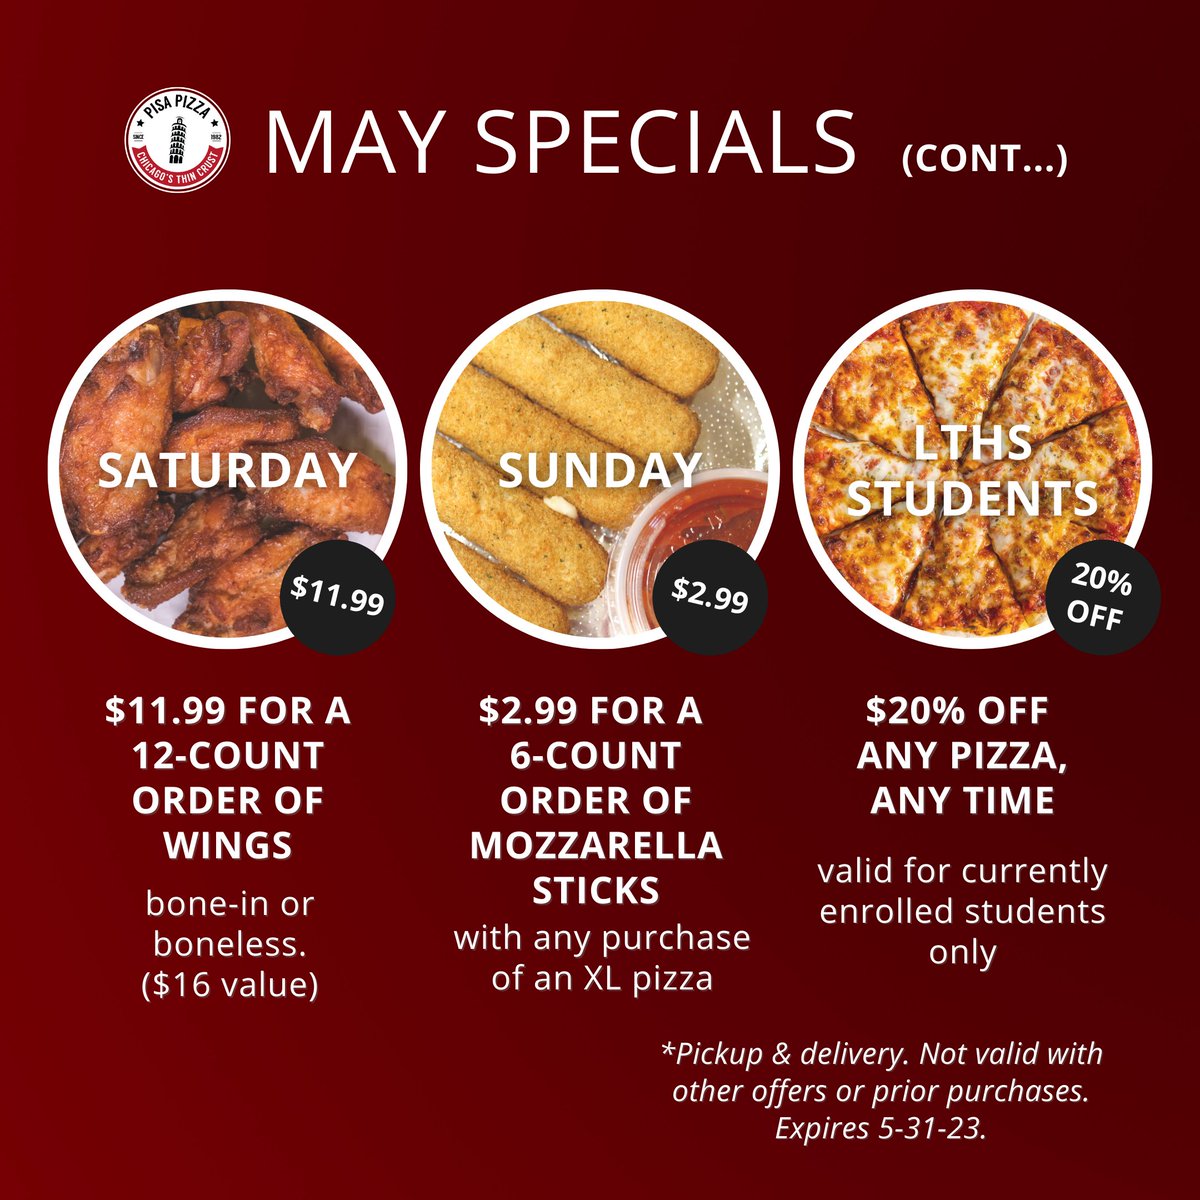 Don't miss out on this month's specials.
 
#pizzaspecials #superthincrust #extrathin #favoritecrust #thursdaytakeout #extrathincrust #carryout #delivery #dinner #pisapizzacountryside